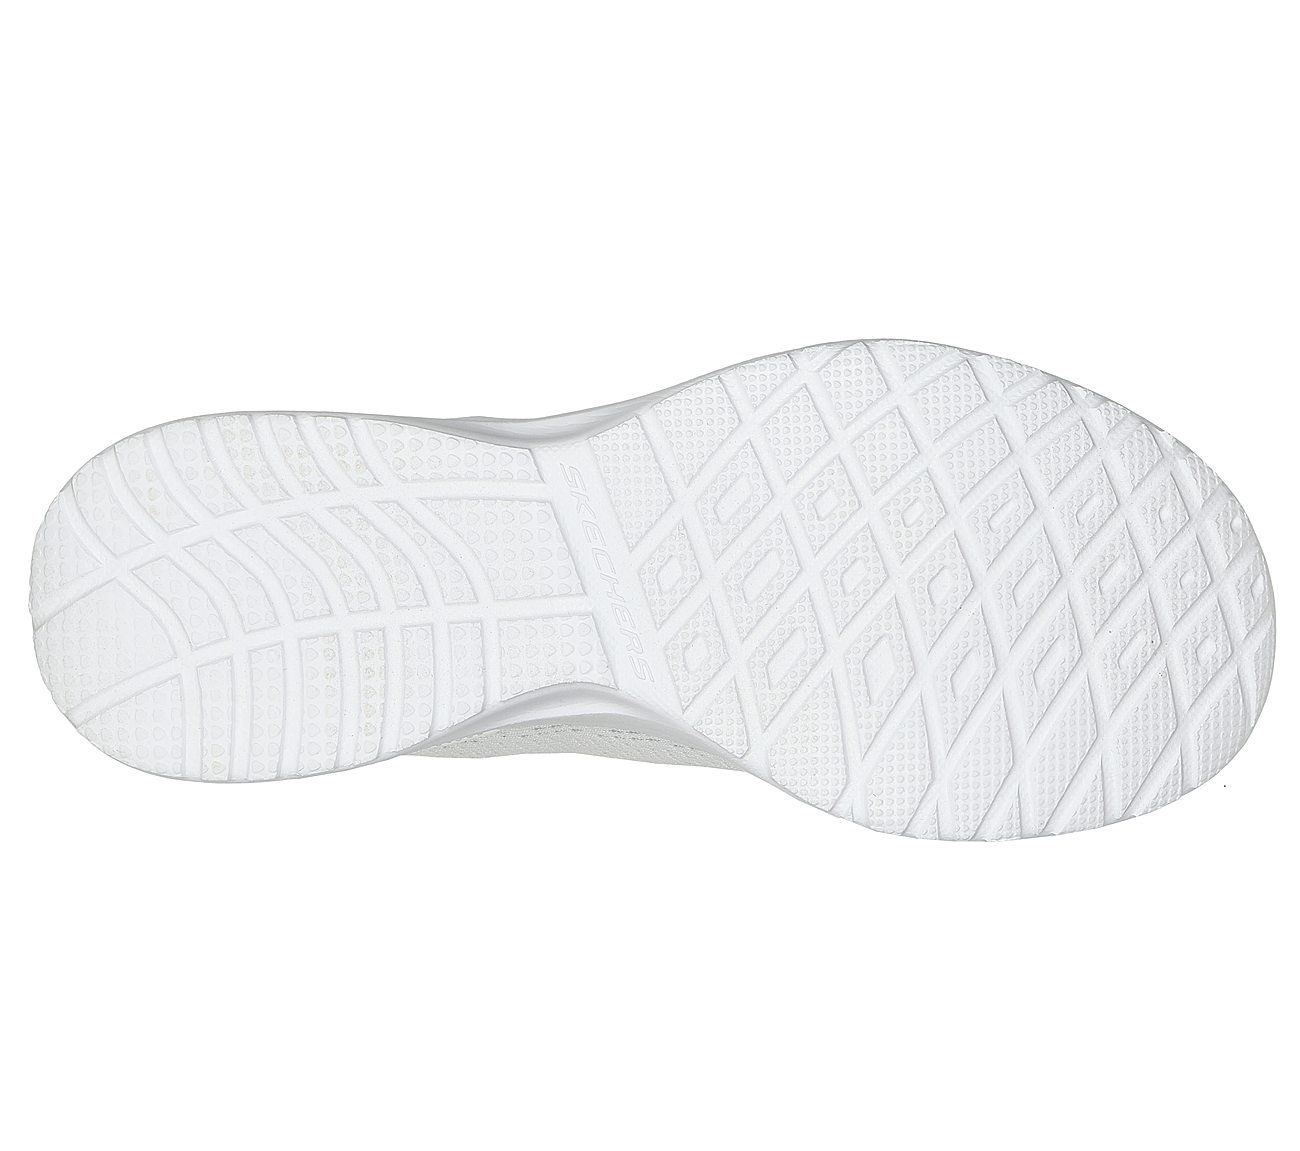 SKECH-AIR DYNAMIGHT-LAID OUT, WHITE/MULTI Footwear Bottom View